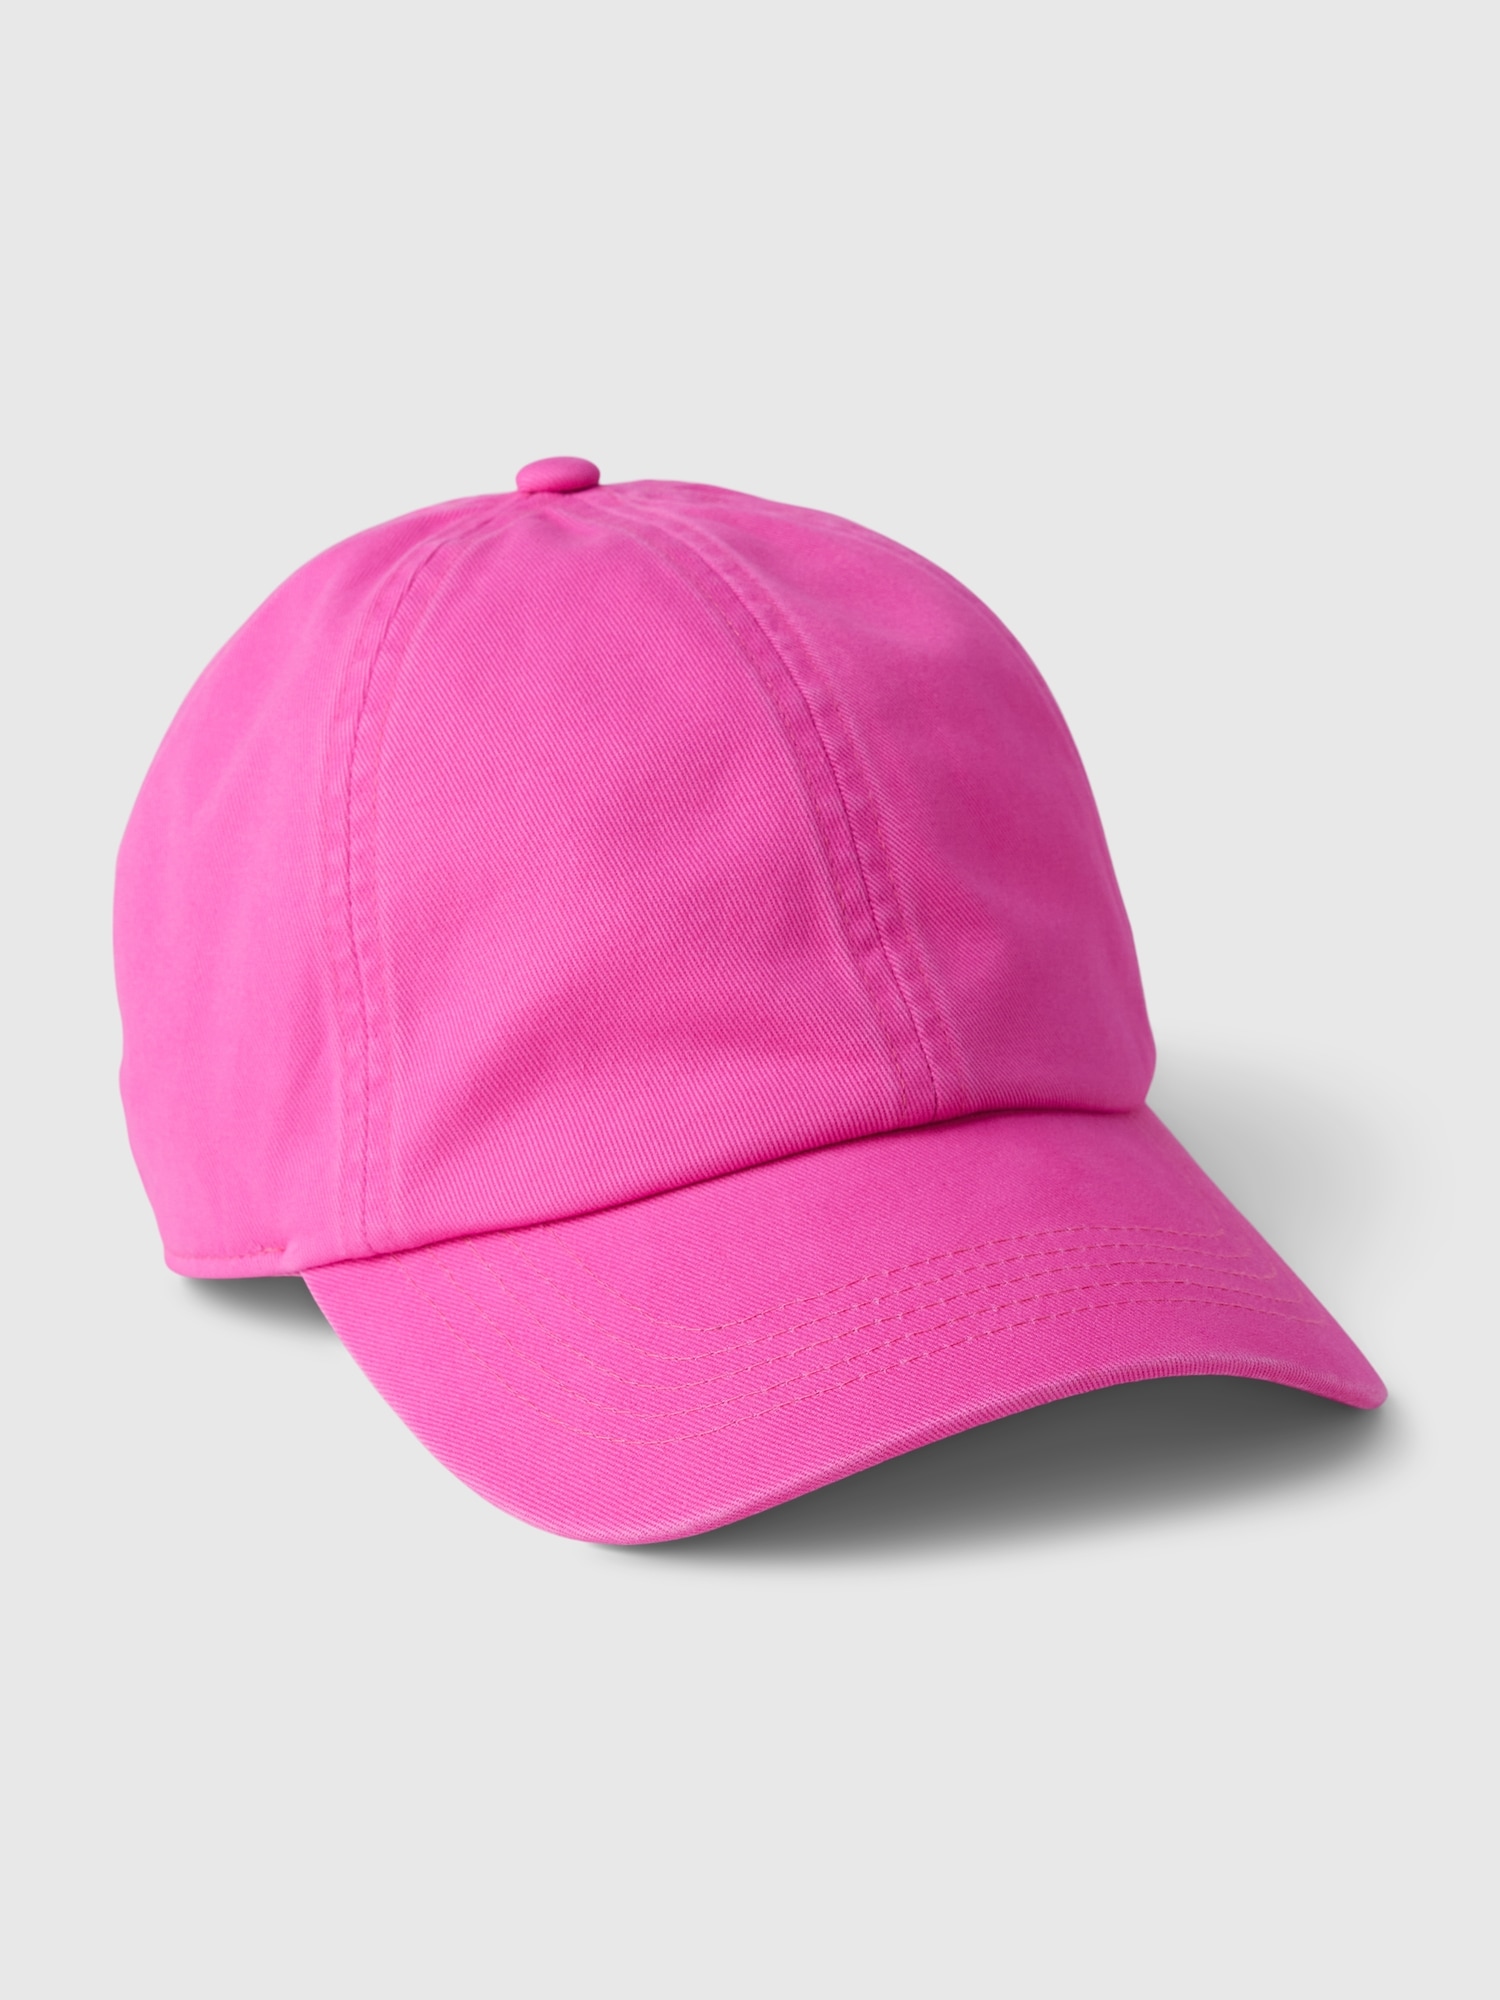 Gap Organic Cotton Washed Baseball Hat In Standout Pink